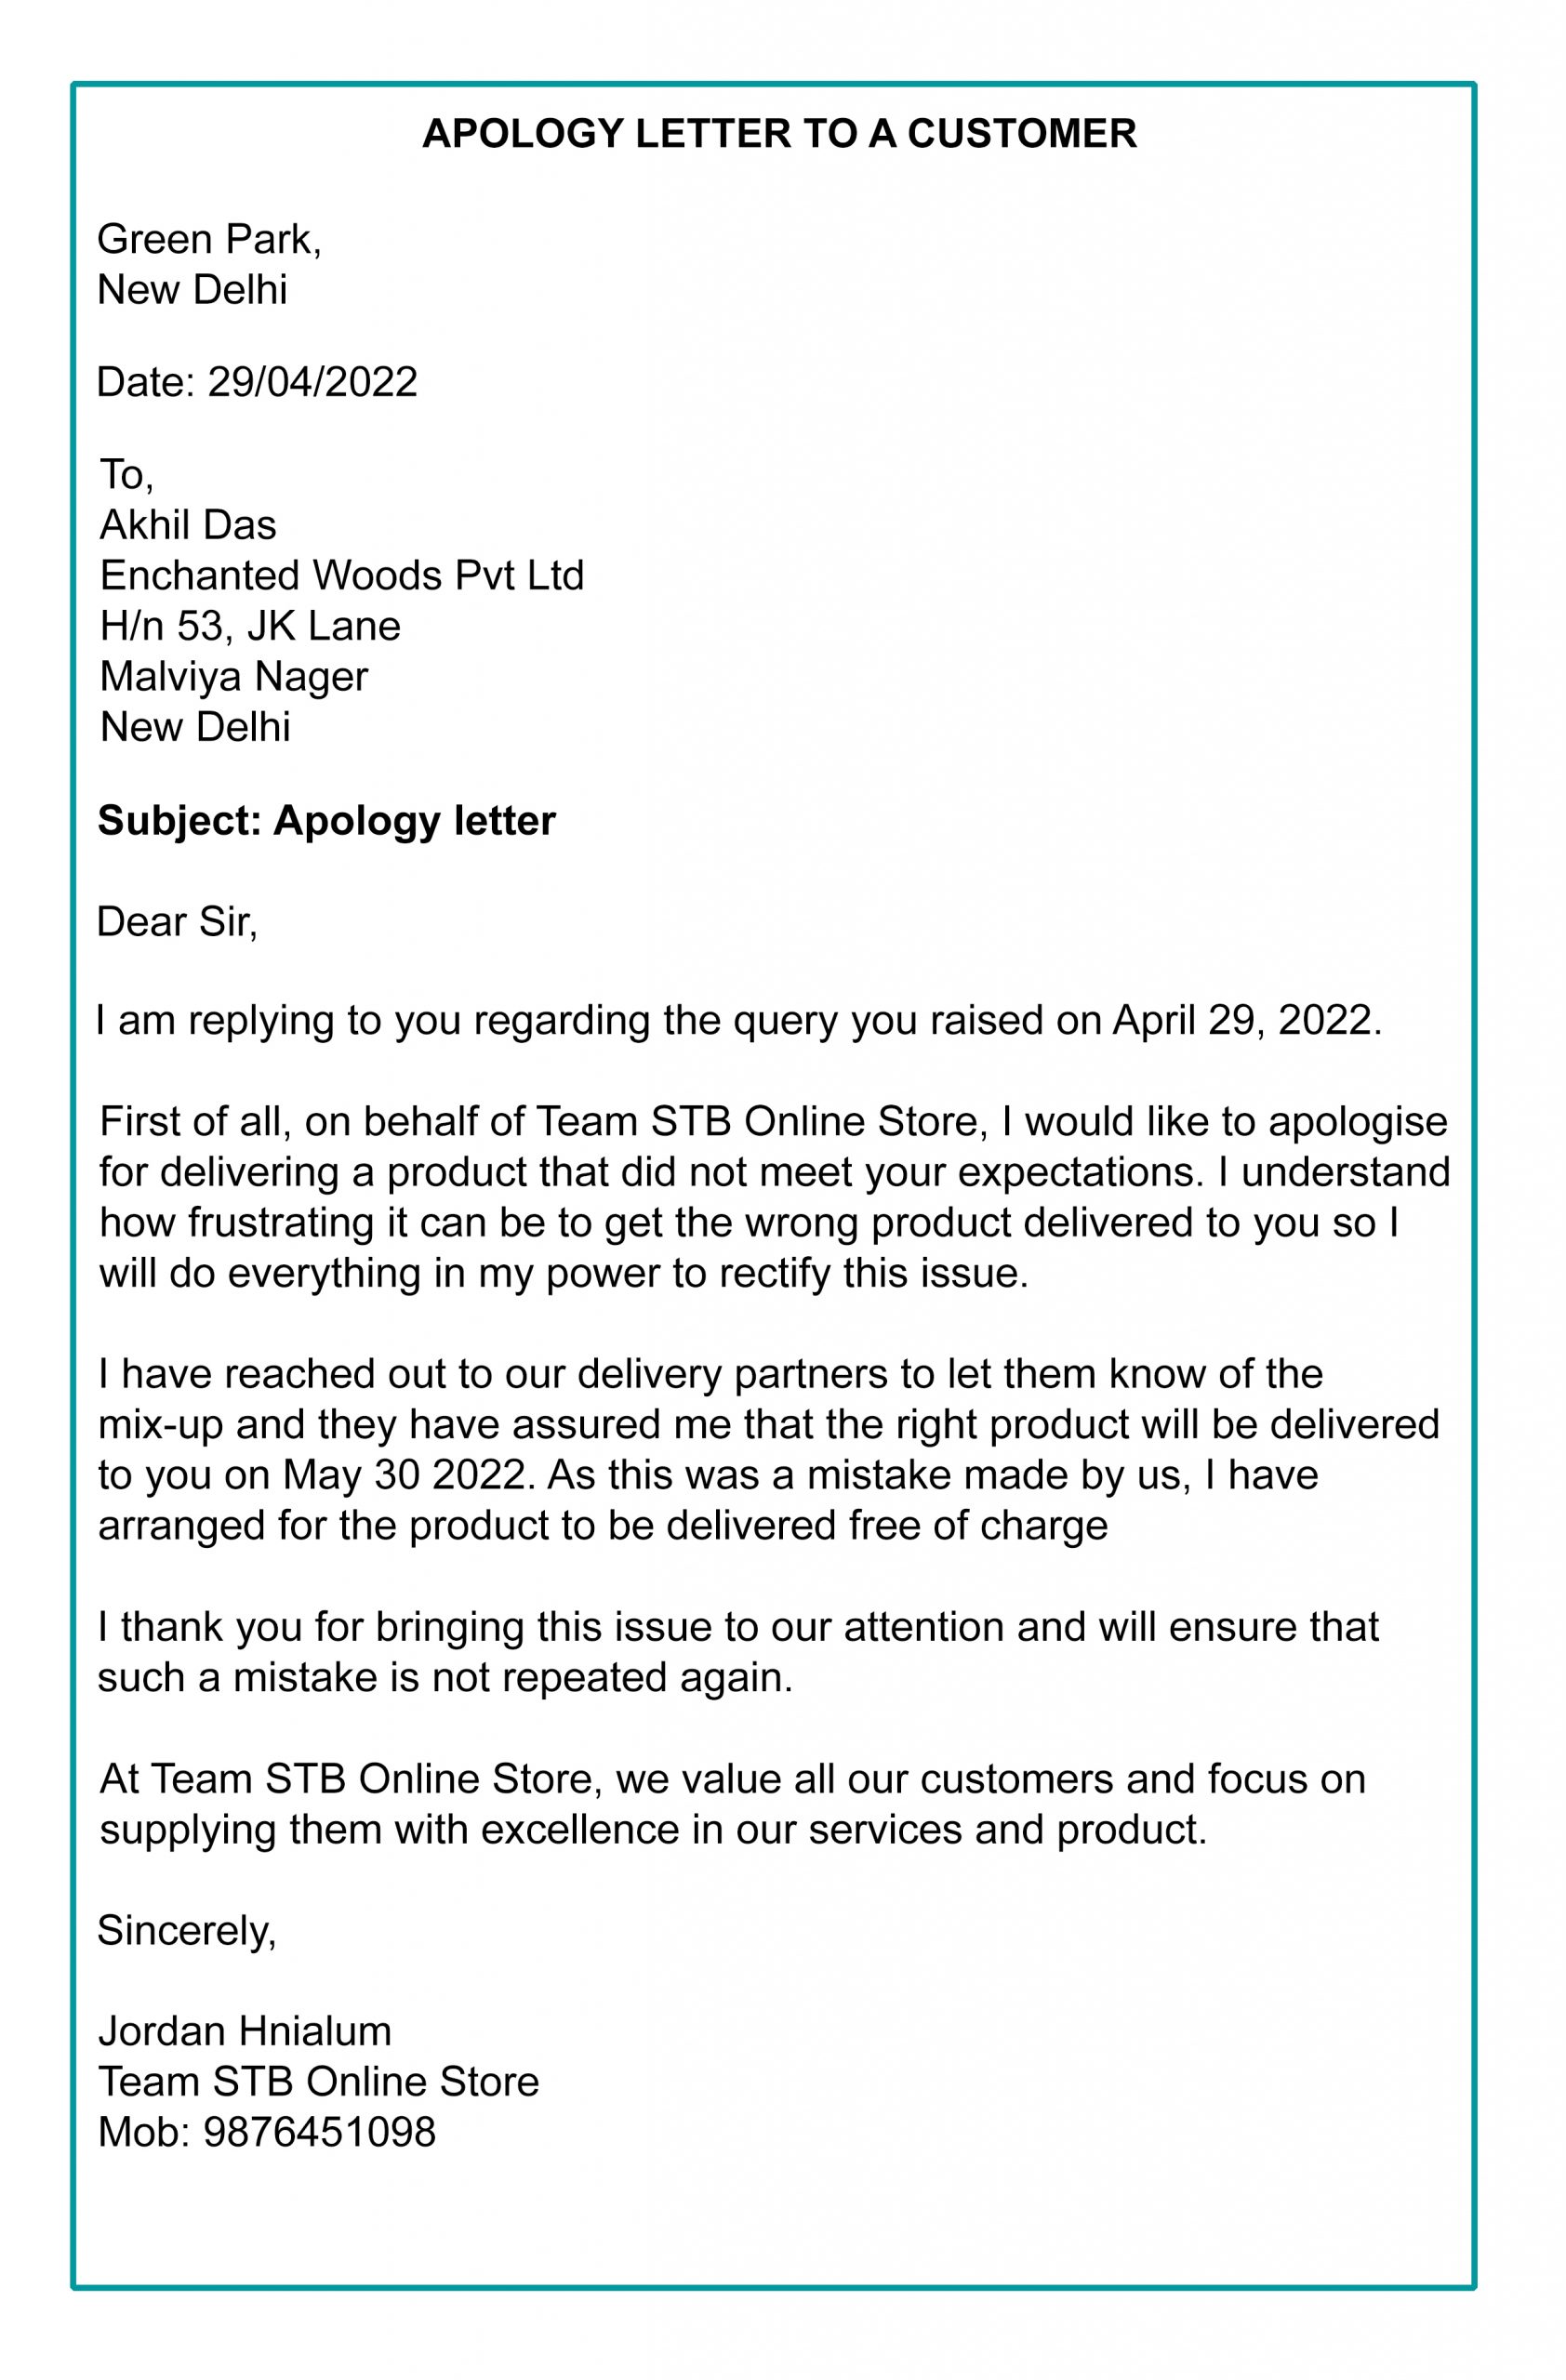 Apology-Letter to customer